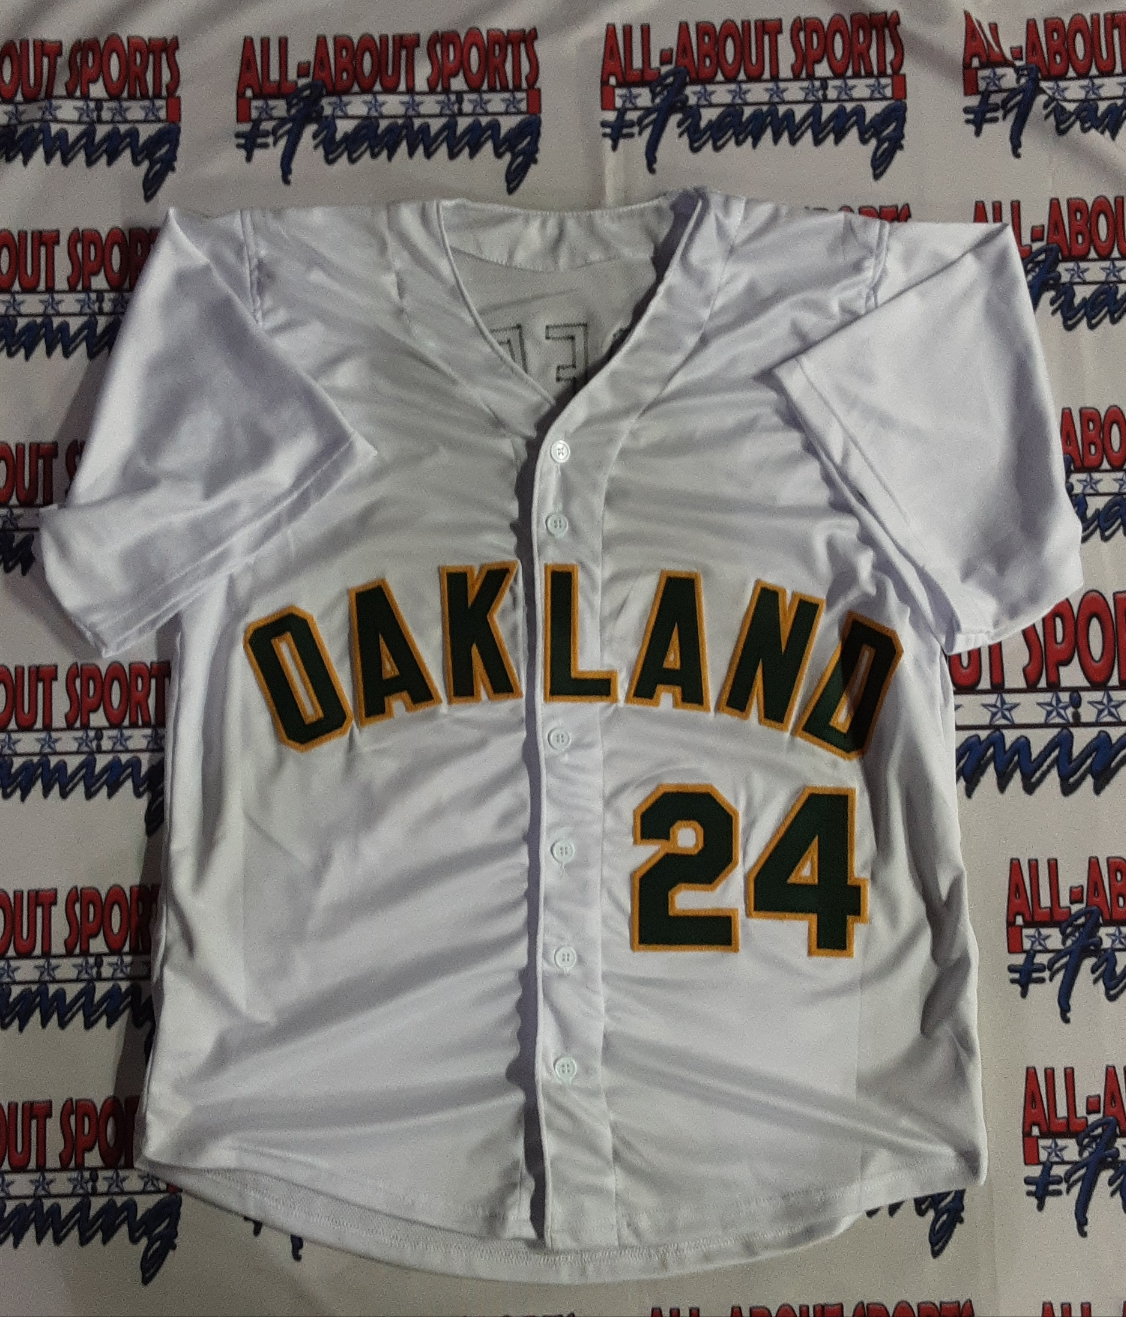 Rickey Henderson Authentic Signed Pro Style Jersey Autographed JSA-